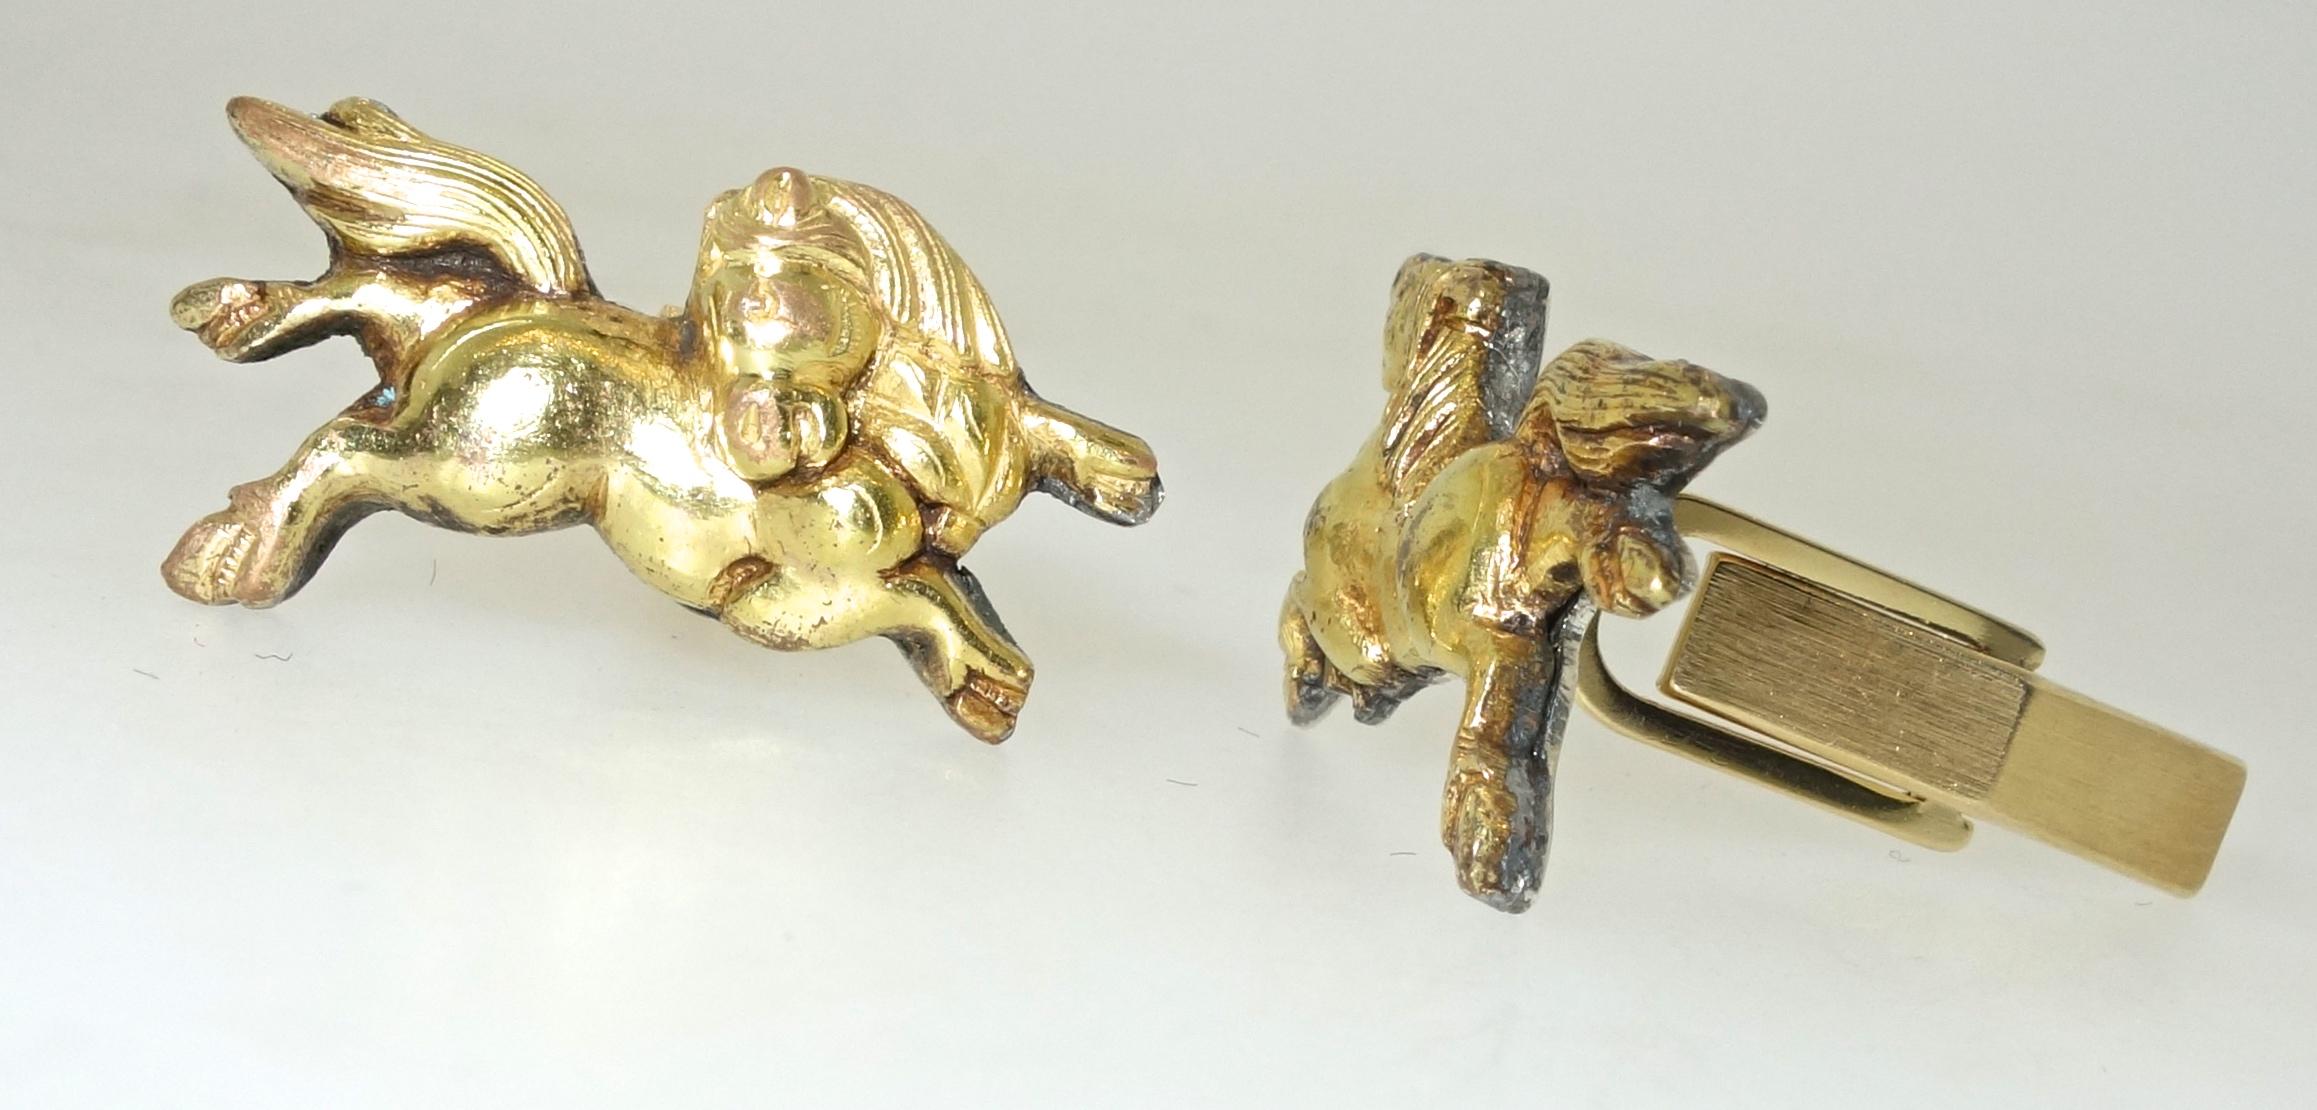 Japanese Shakudo style horse motif cufflinks, silver and gold, these cufflinks with wonderful detail are one inch in length.